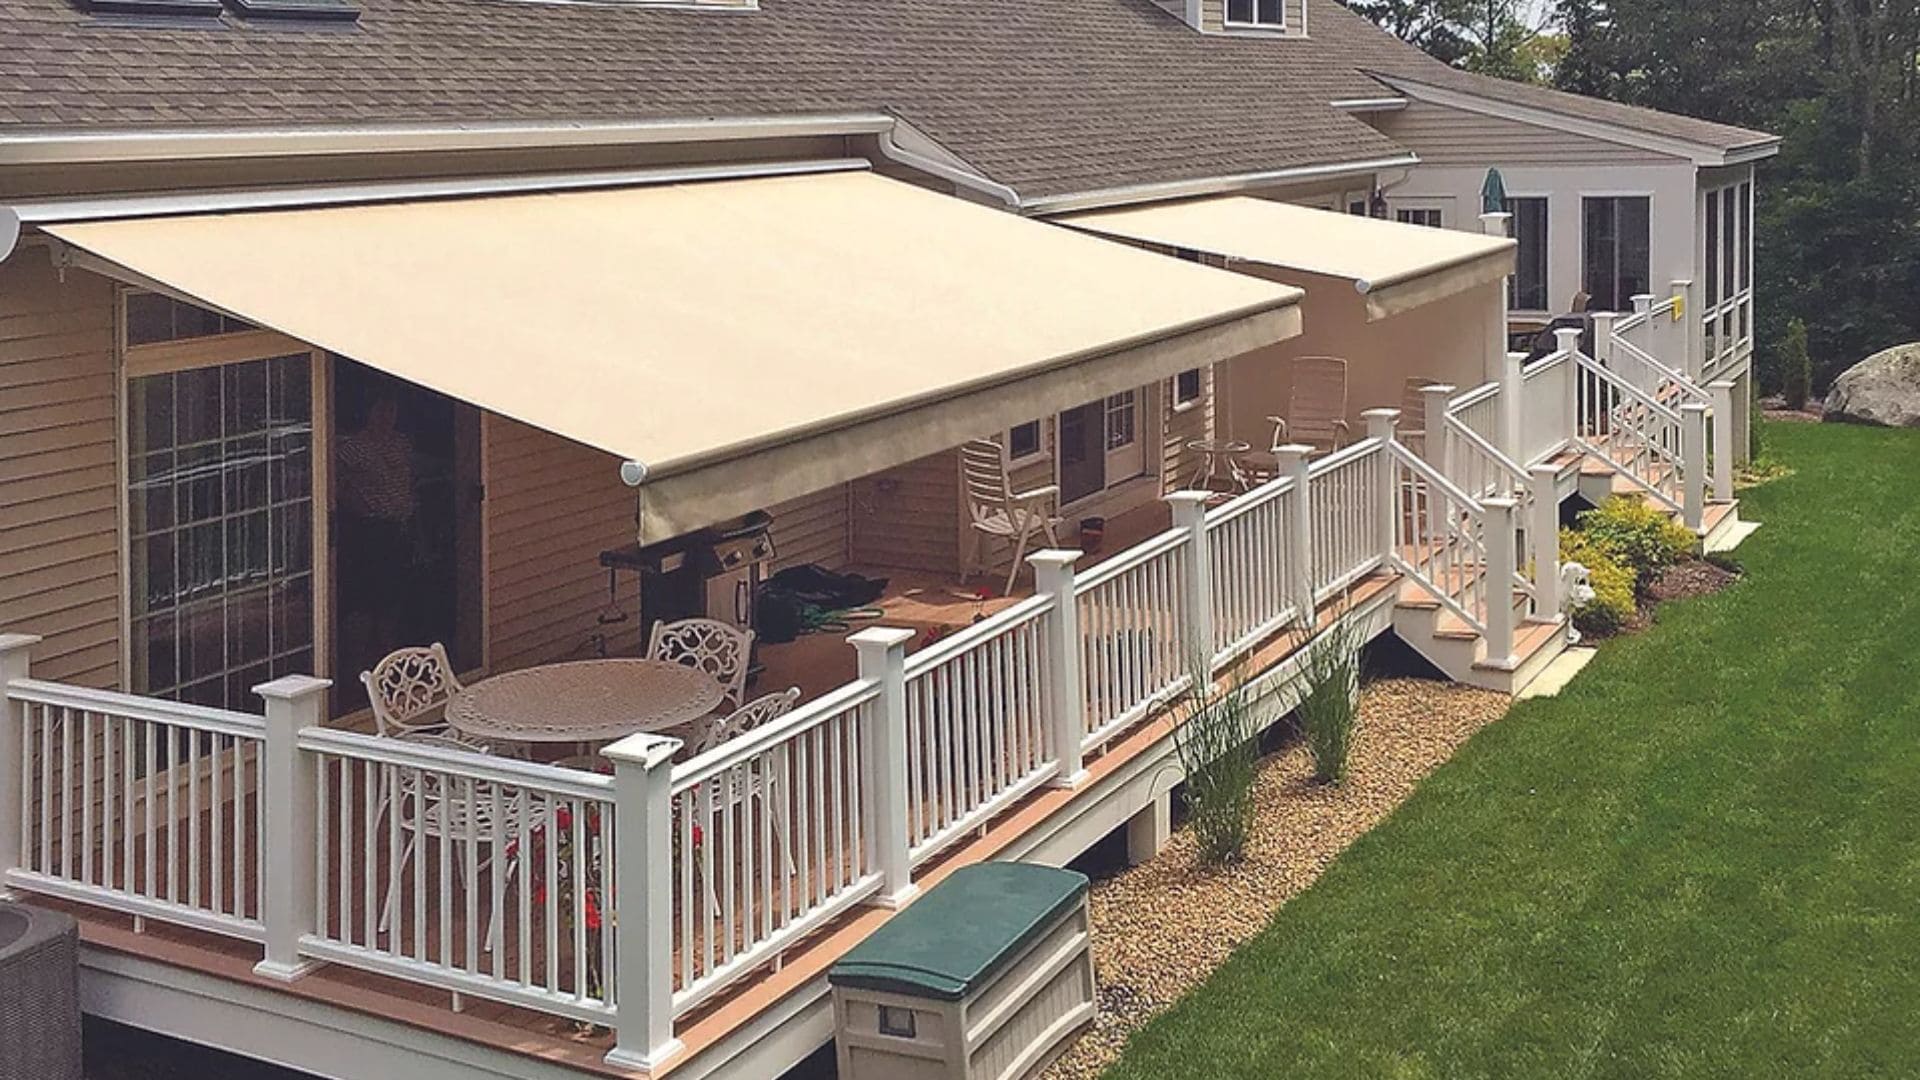 DIY Retractable Awnings Versus Professionally-Installed Retractable Awnings